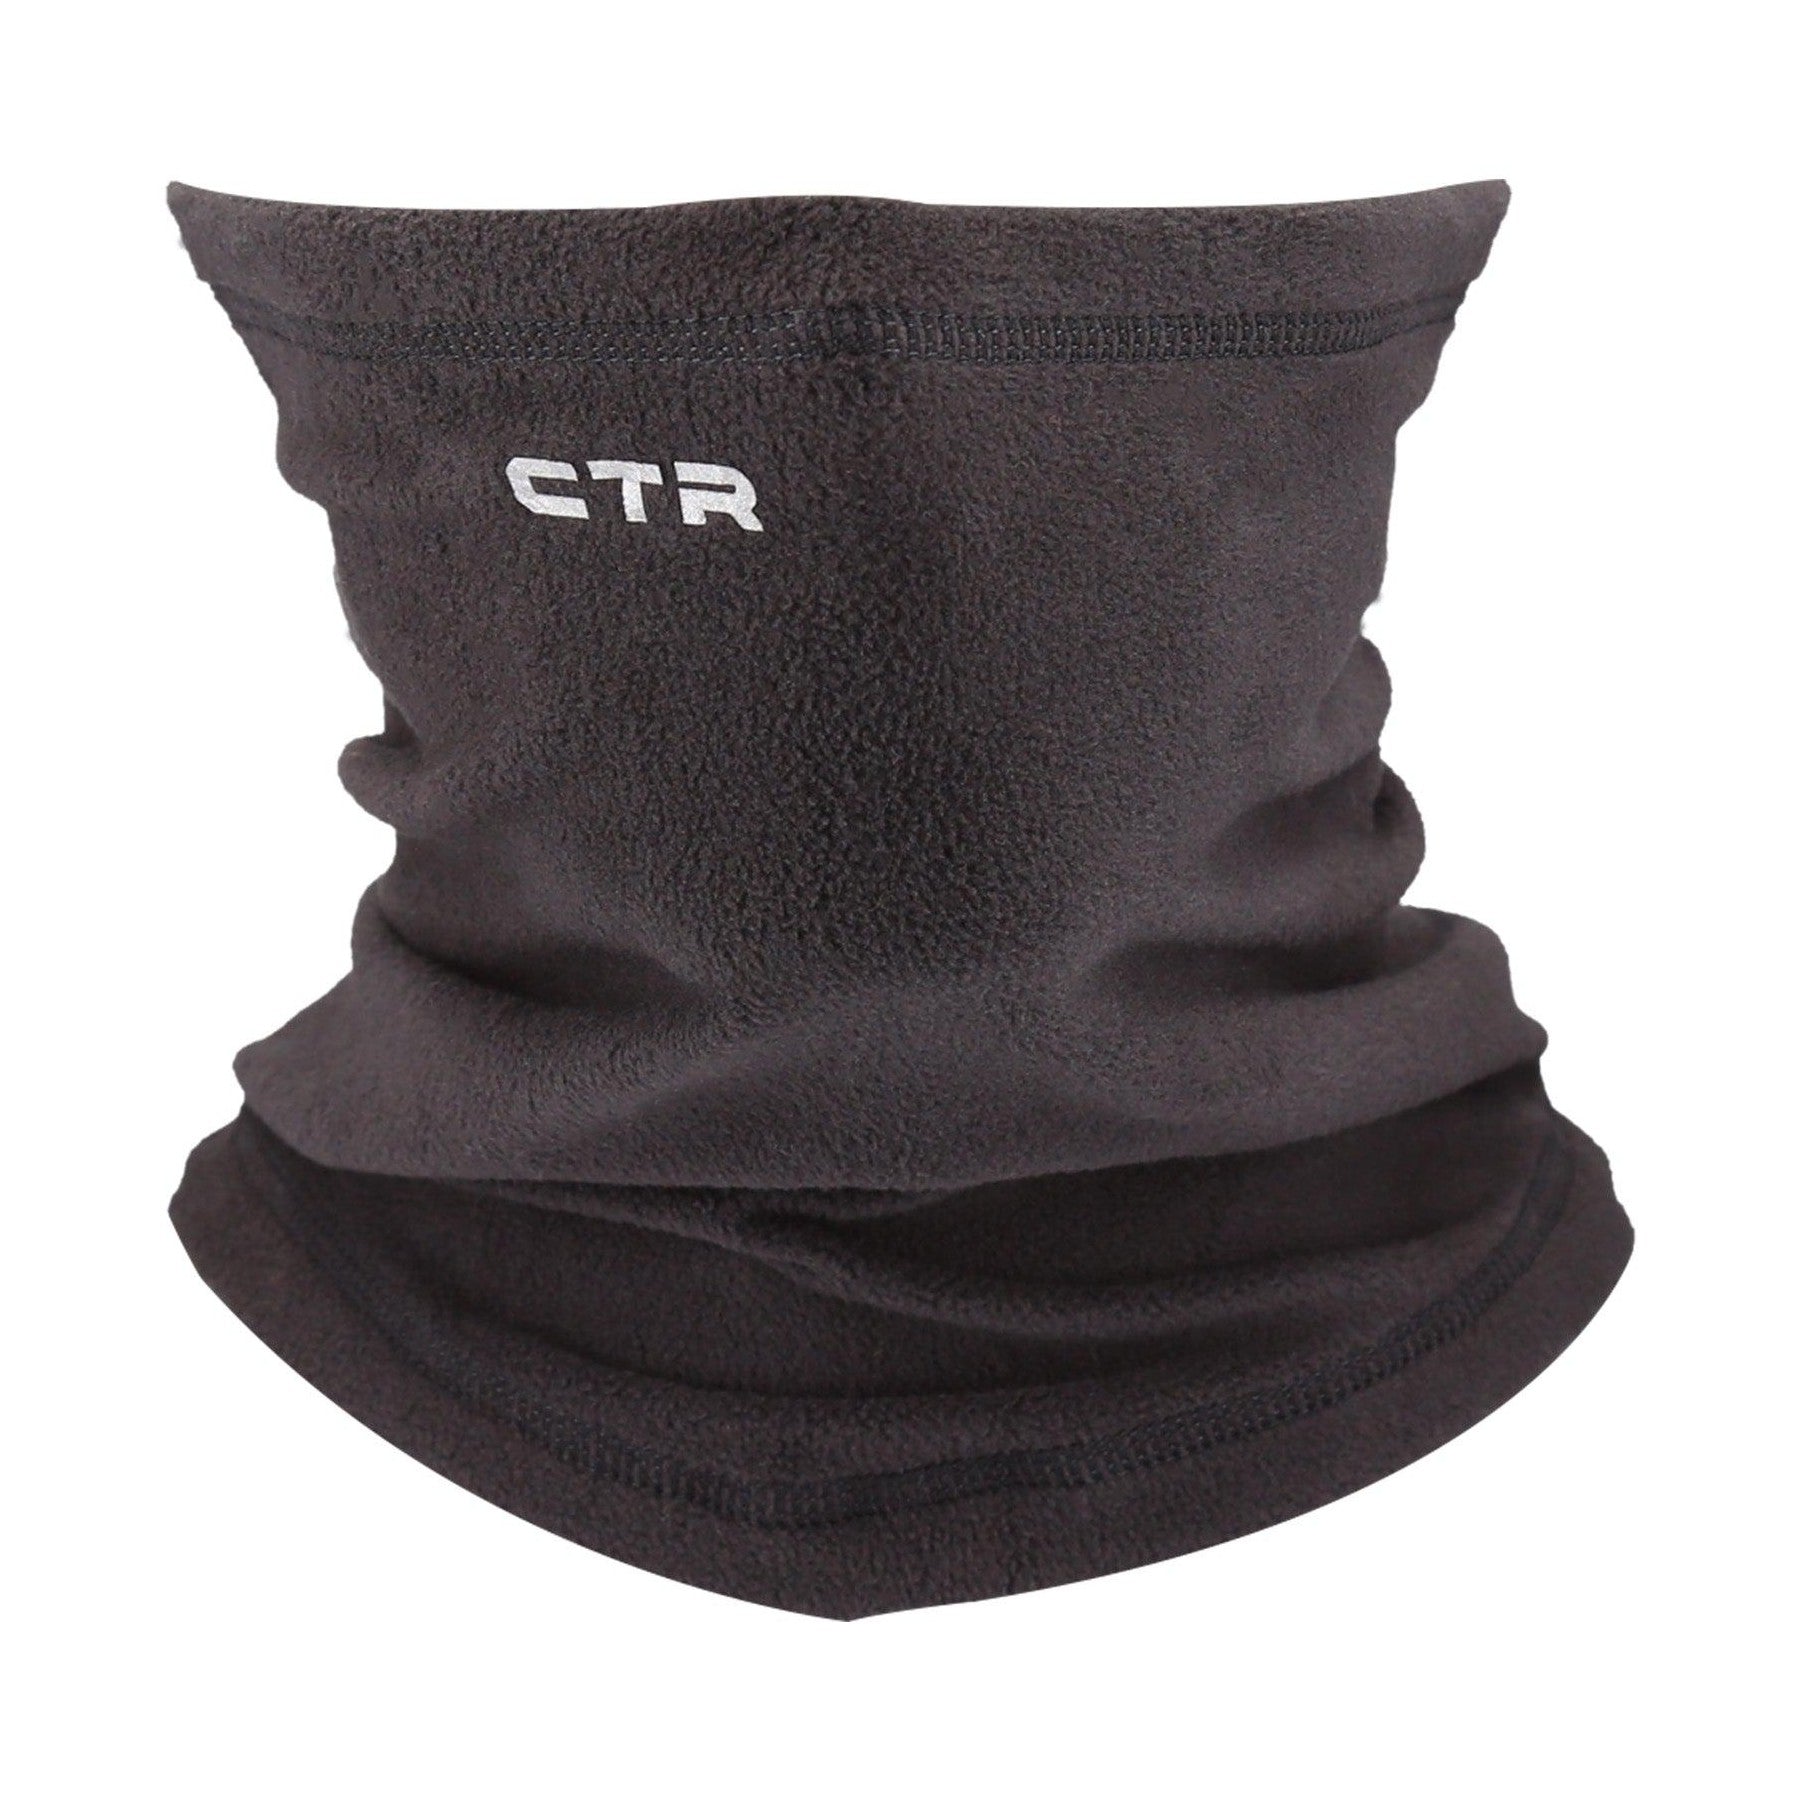 Tempest Neck Gaiter Style:1684 - CTR Outdoors